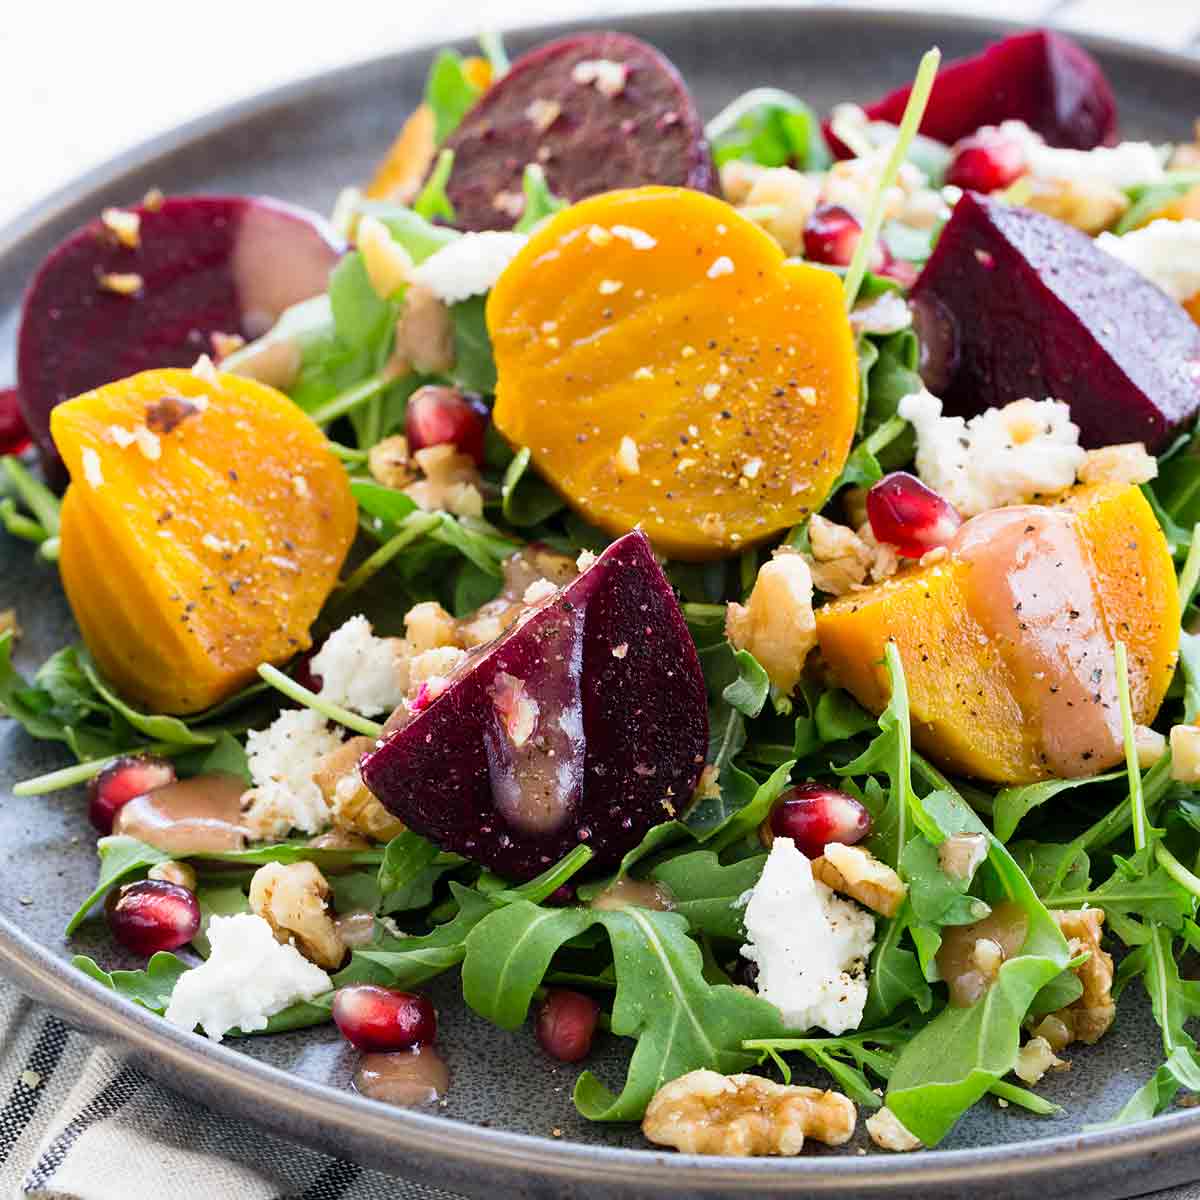 Beet salad with goat cheese